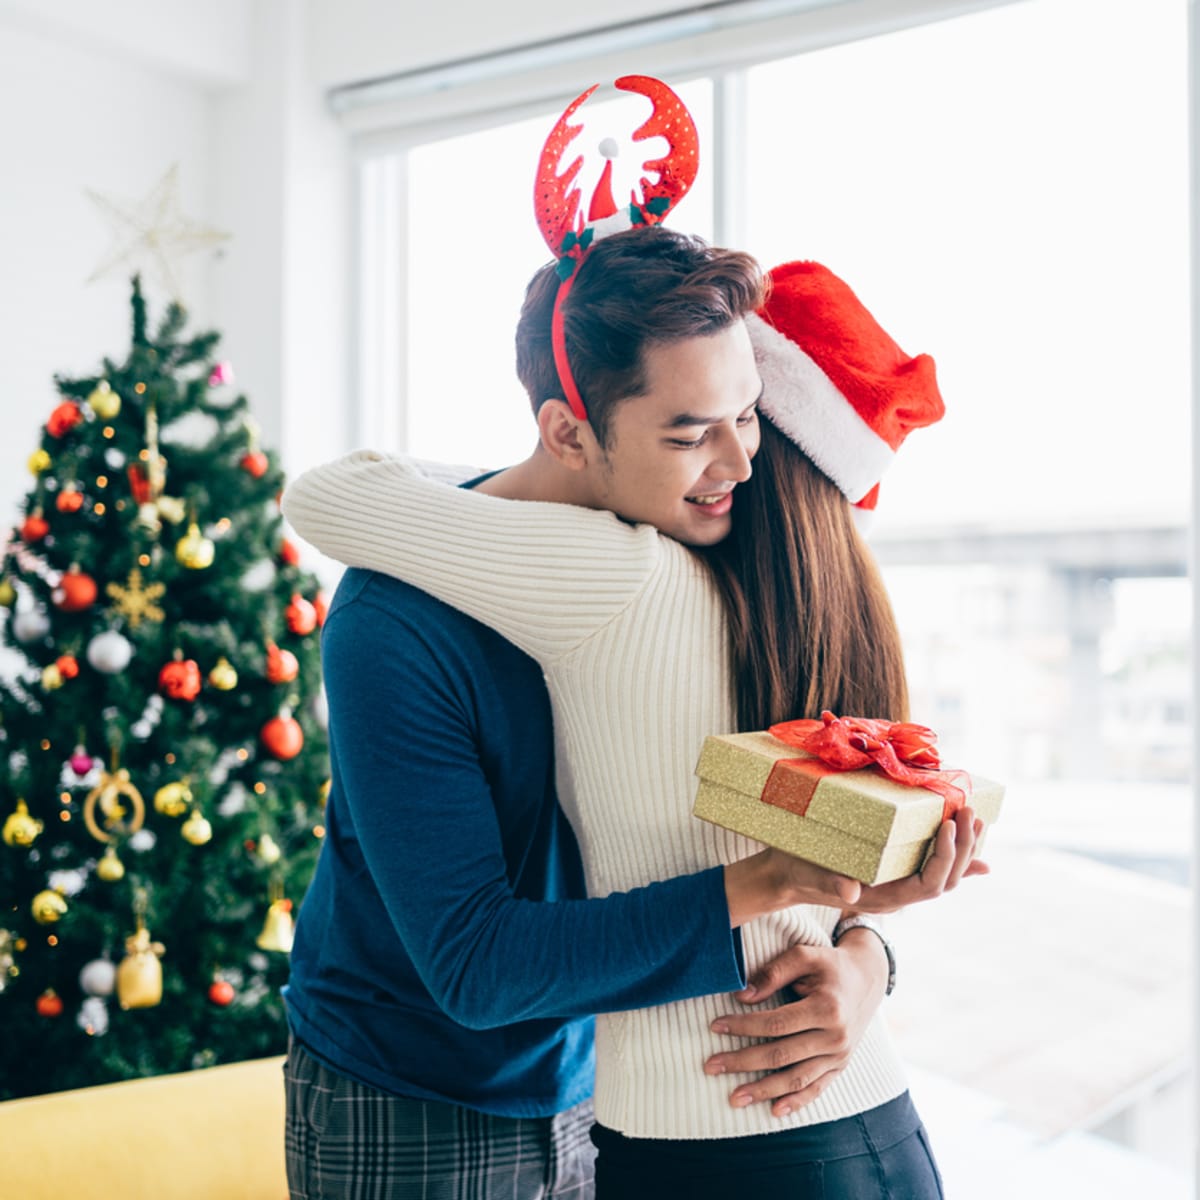 5 Creative Presents Your Girlfriend Will Love This Holiday